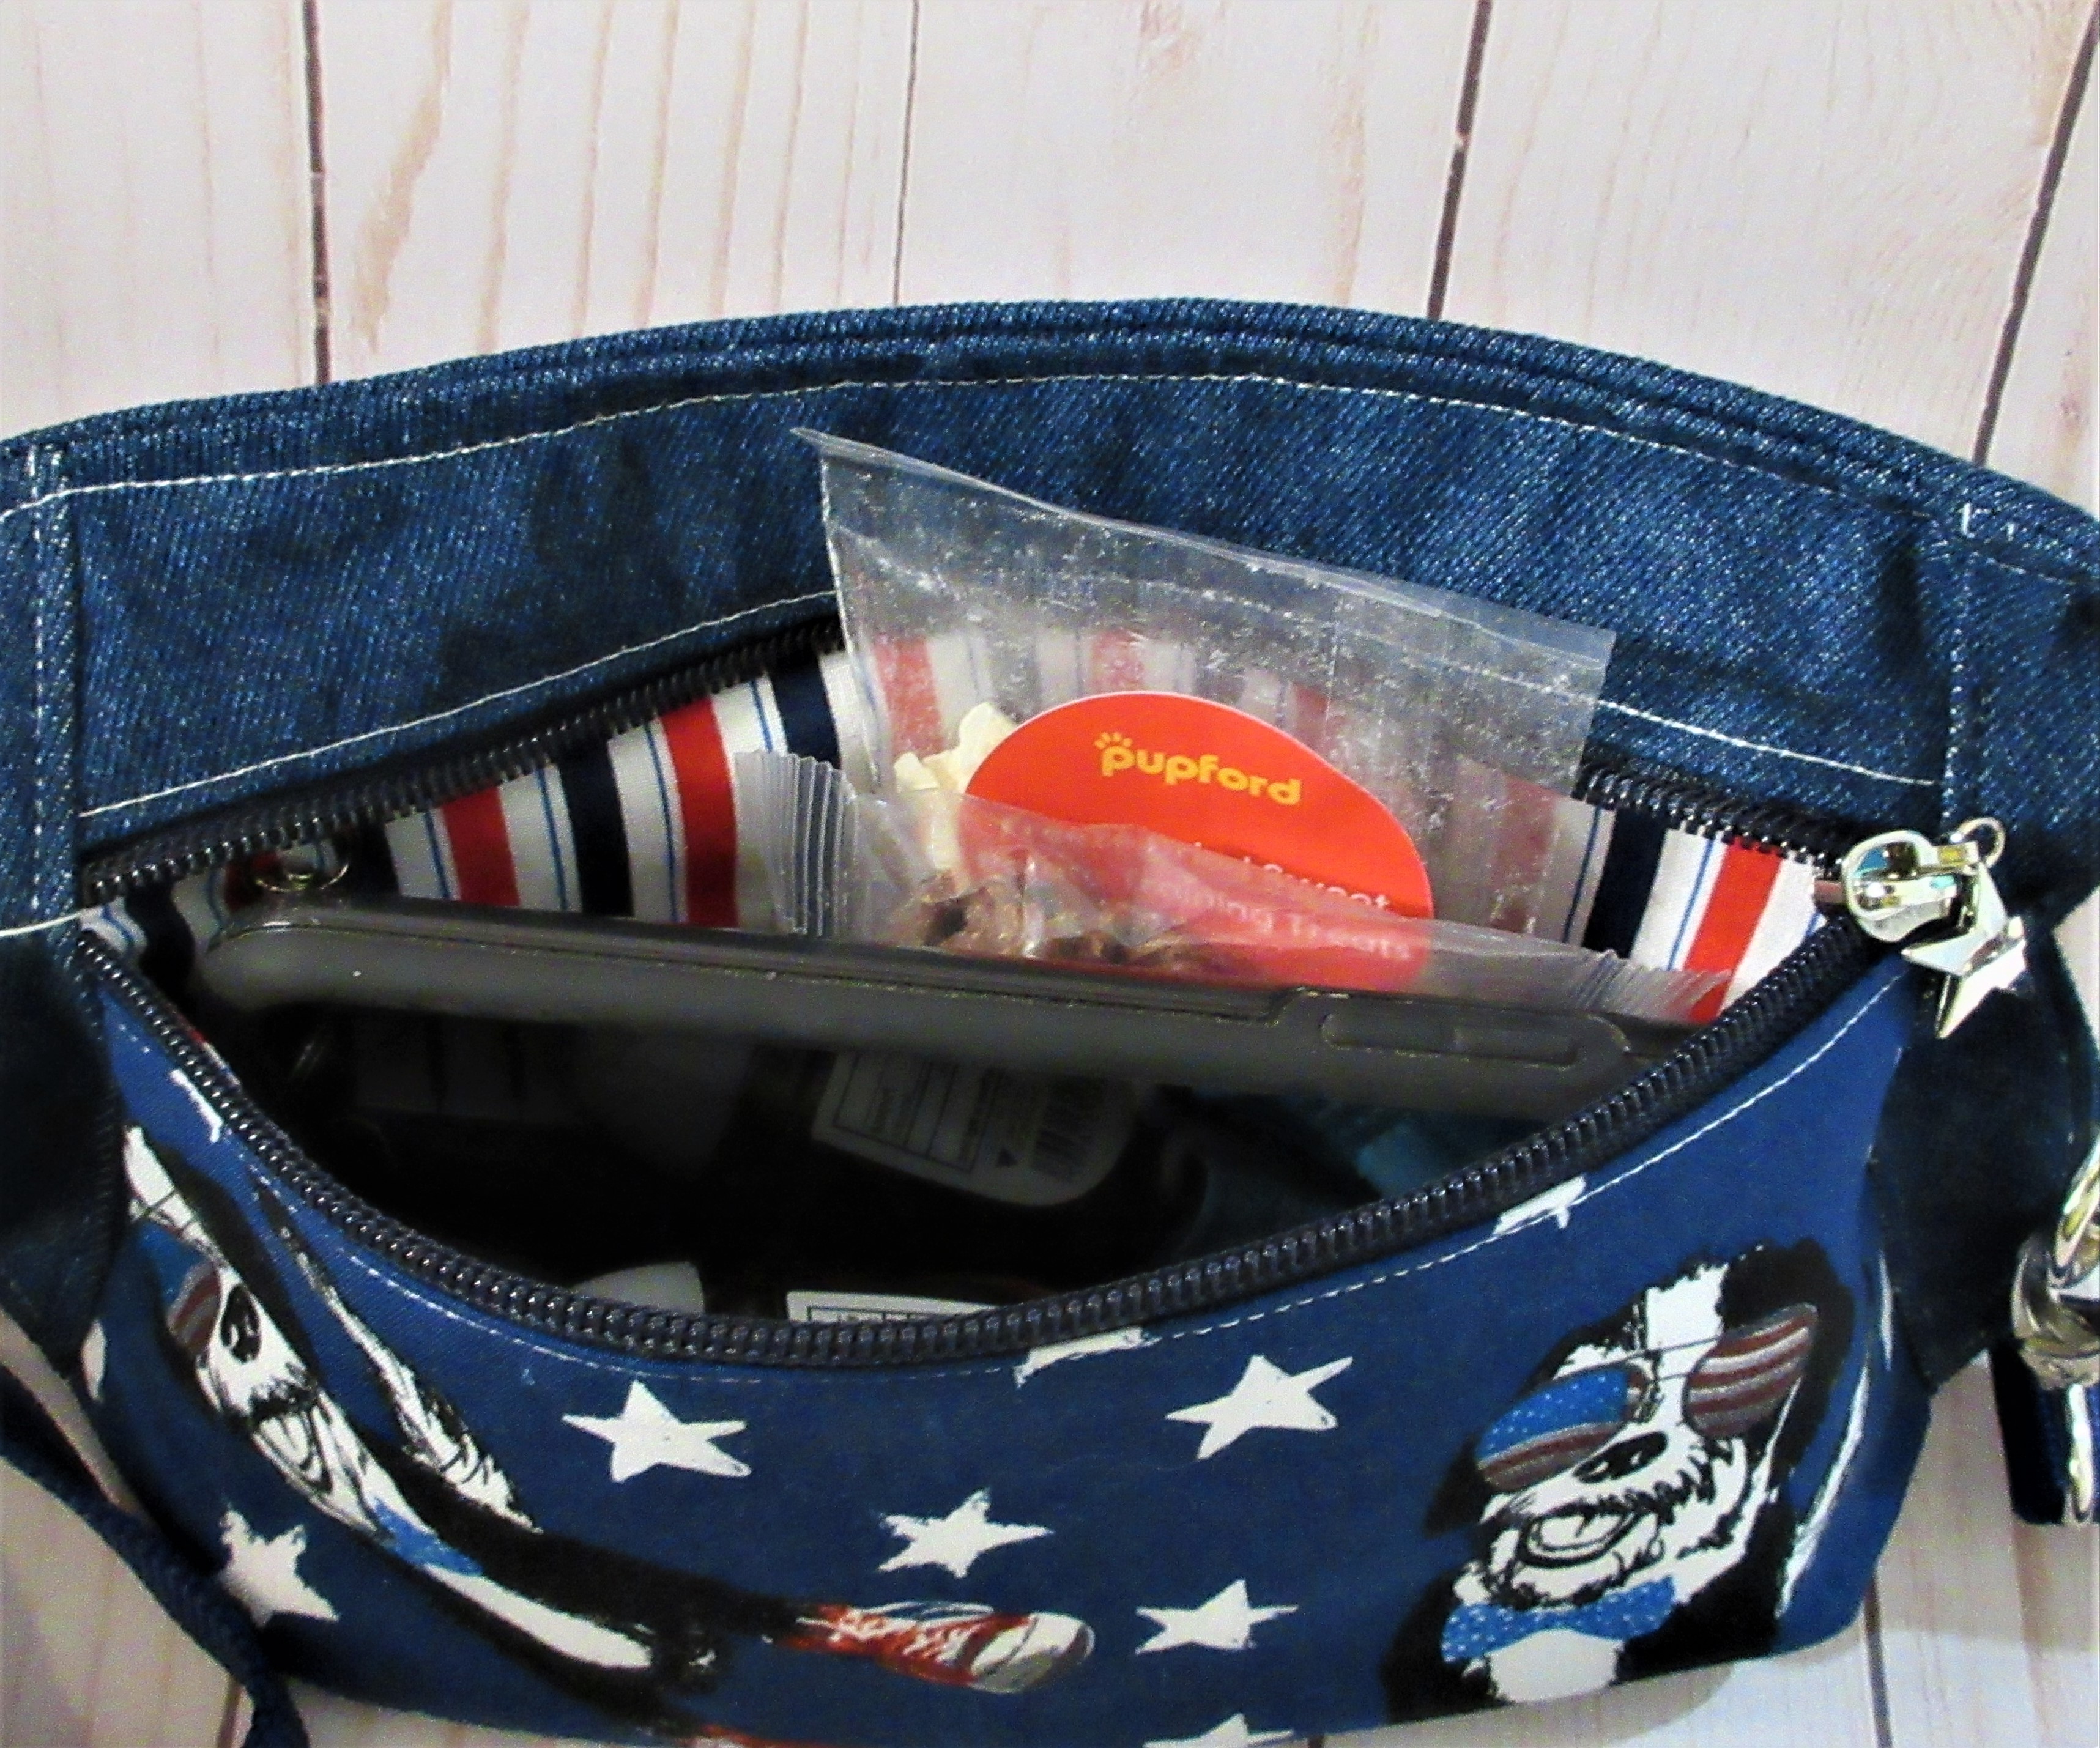 Rock Star Dog Fanny Pack for men or women Adjustable strap with Red white and blue lining  waist pack